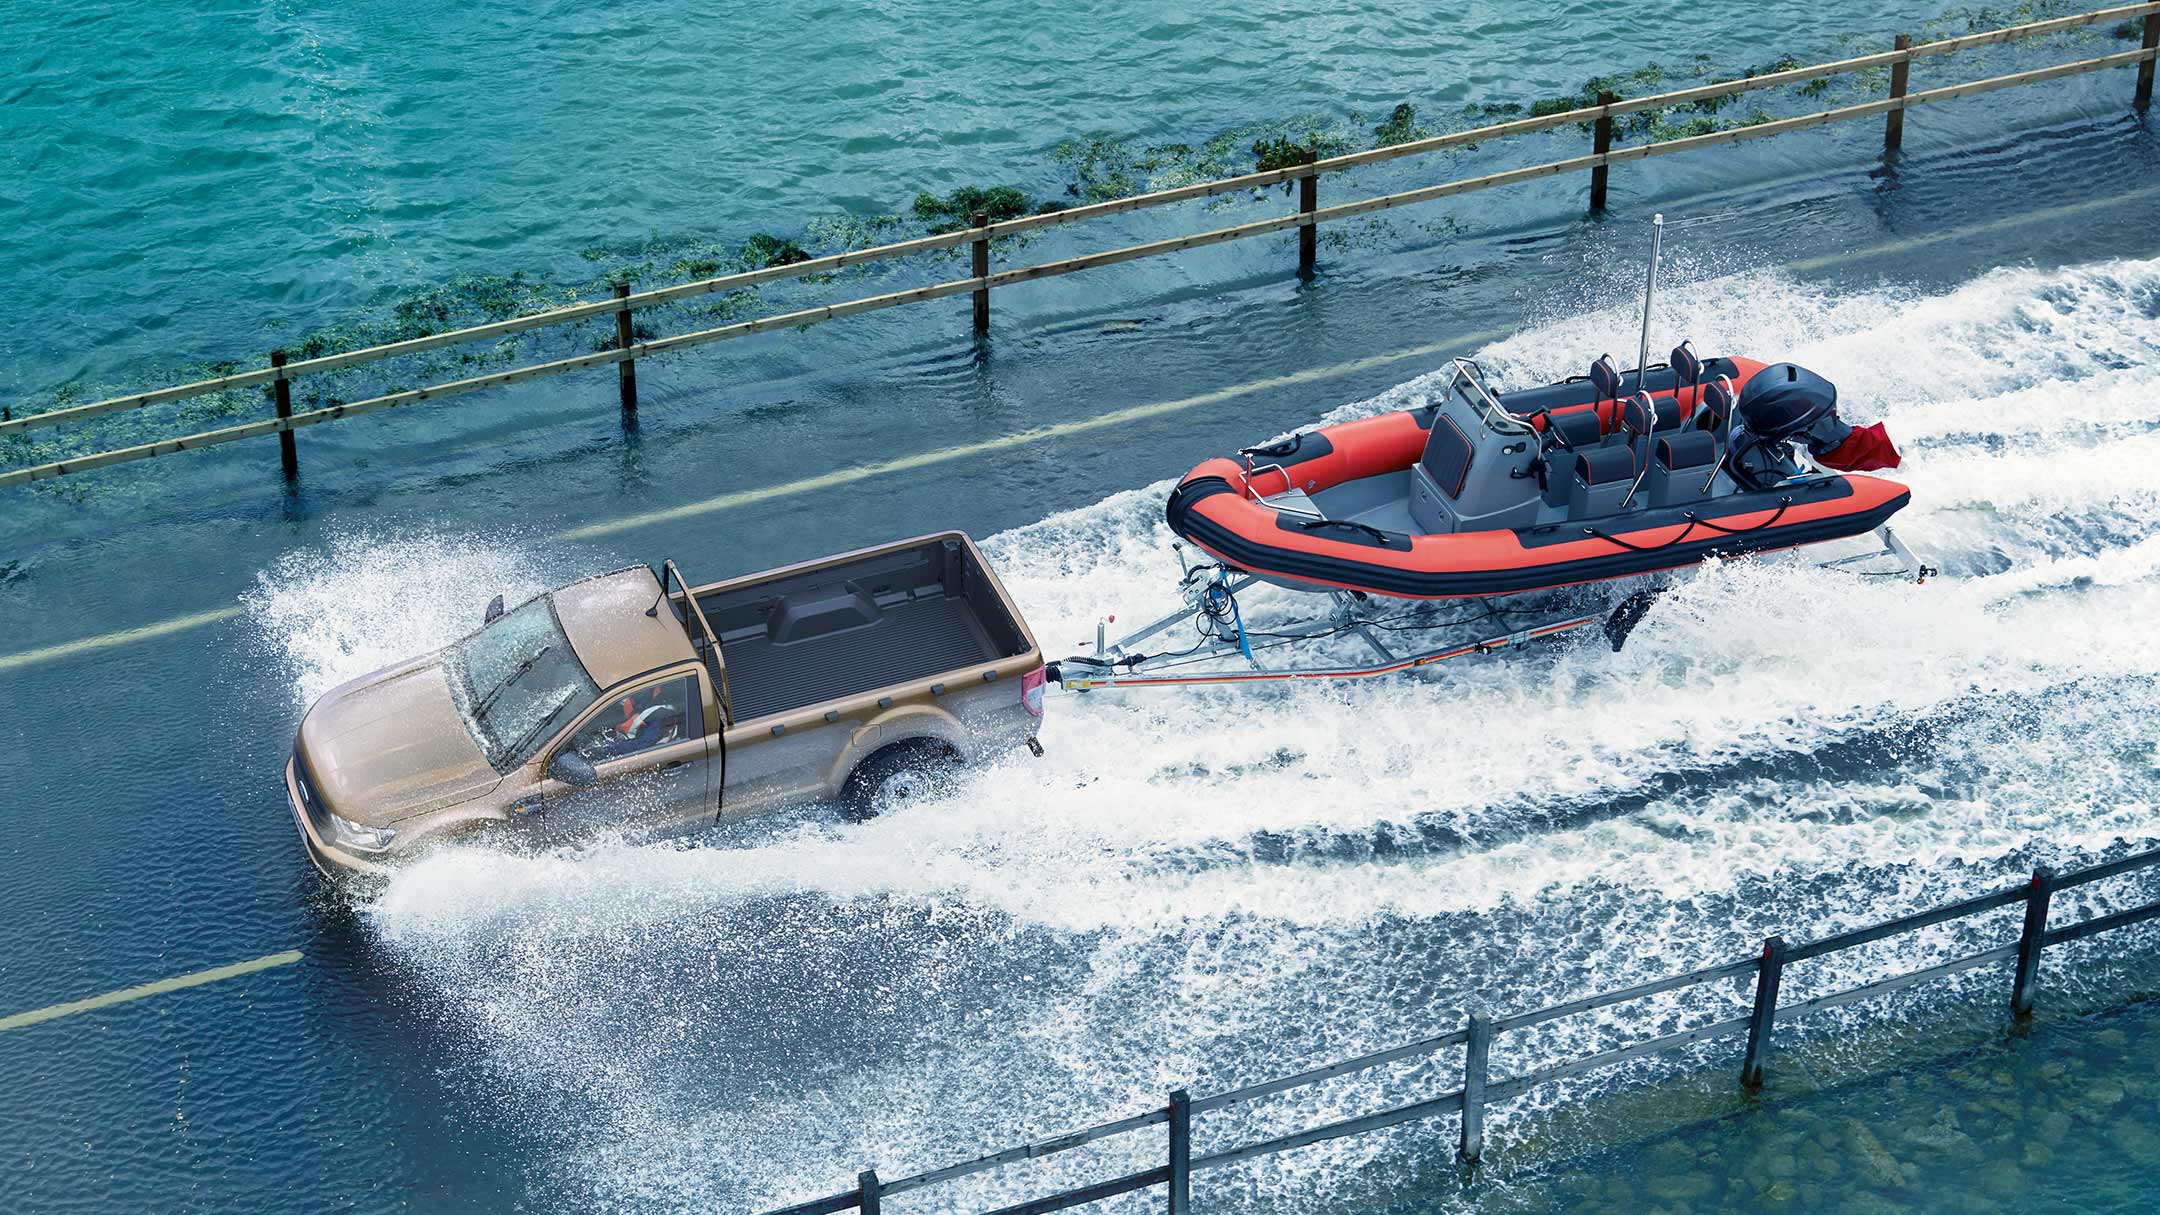 Silver Ford Ranger towing speedboat